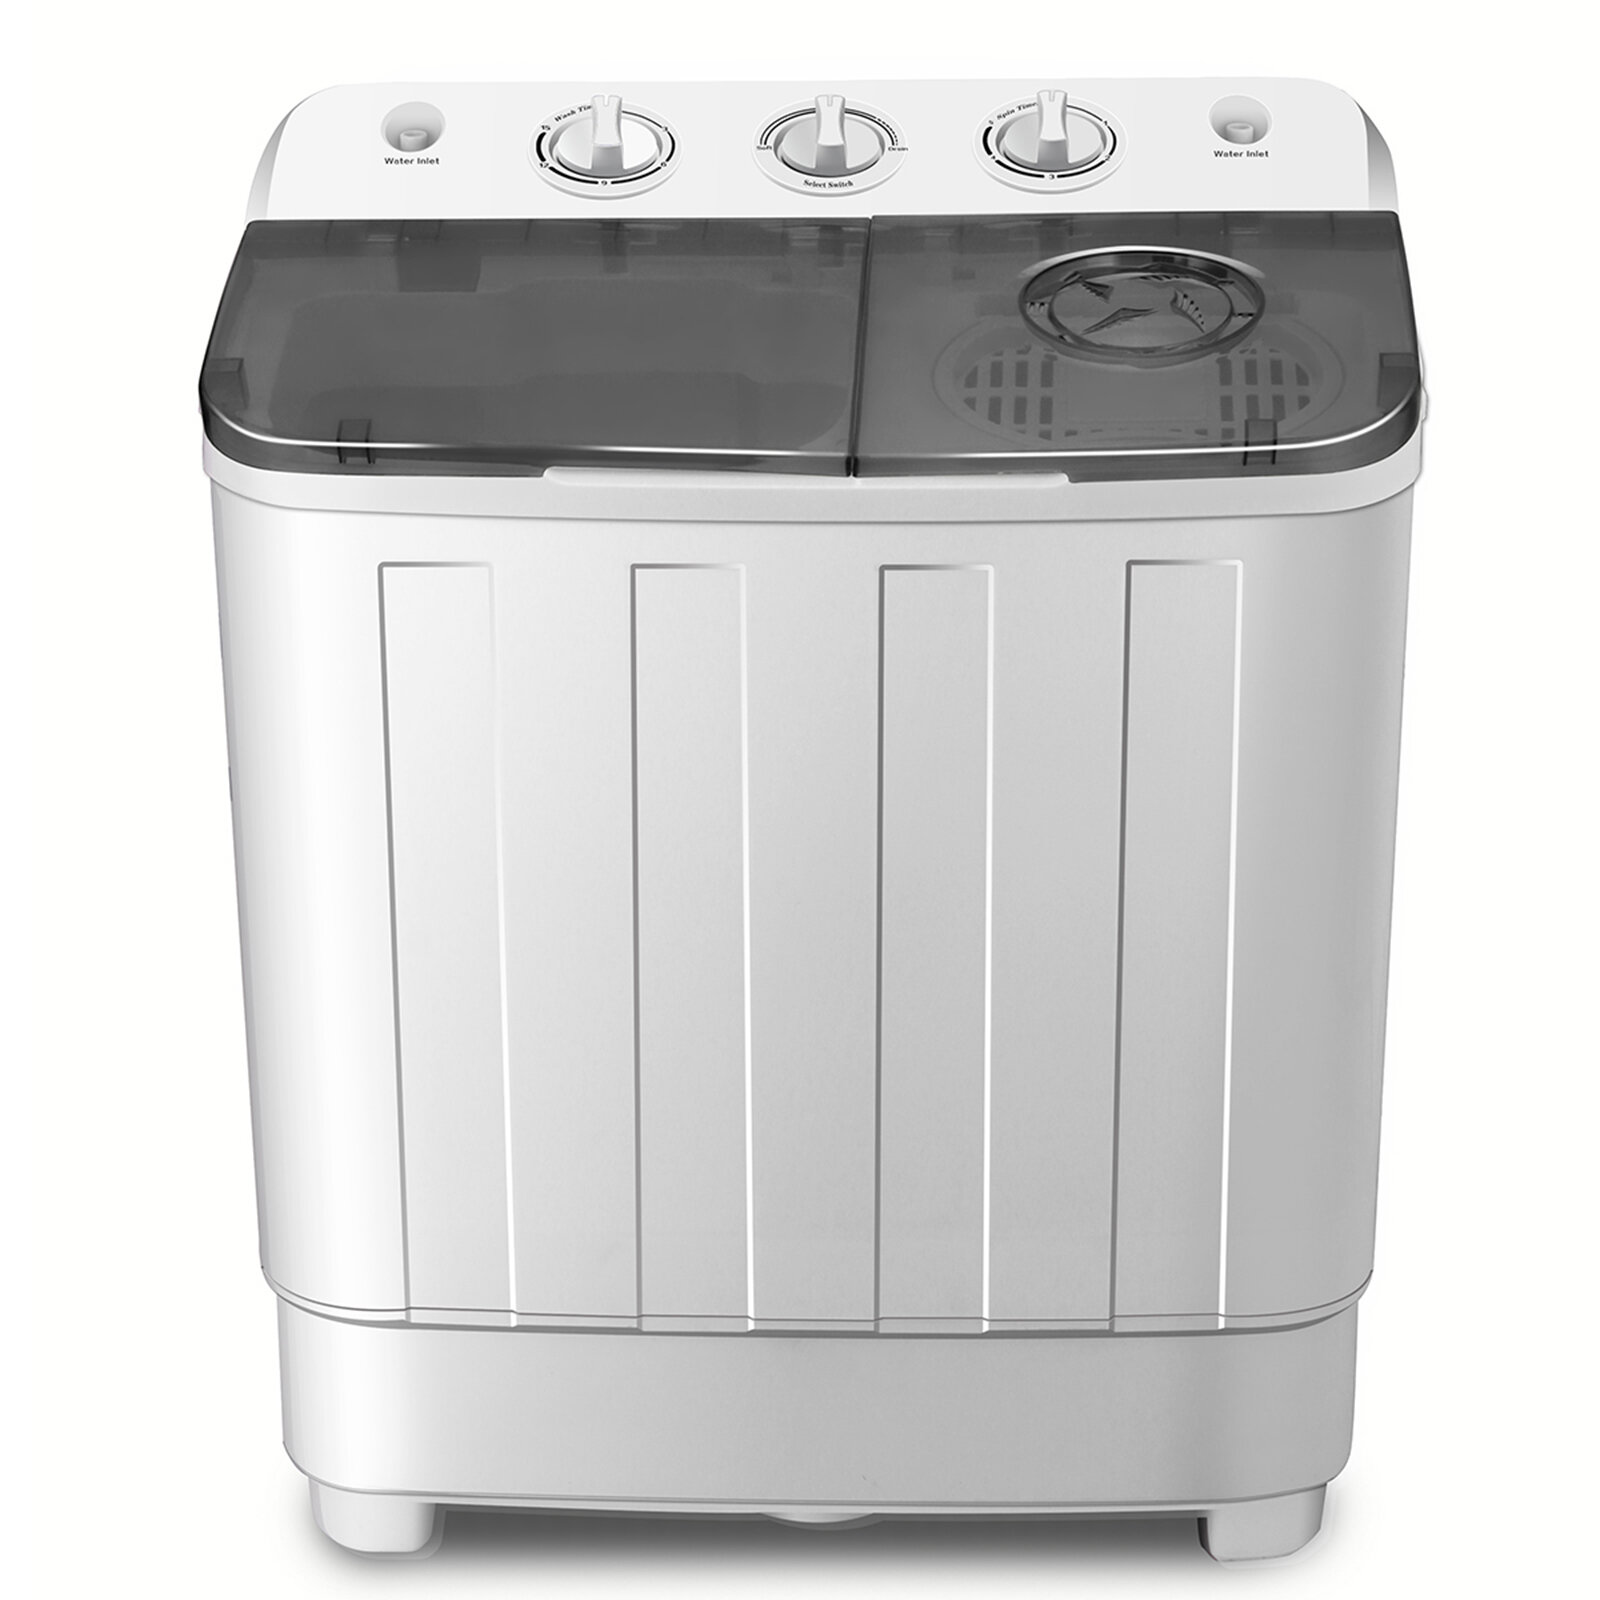 Suncrown 4.6 Cubic Feet Cu. ft. Portable Washer & Dryer Combo with Child Safety Lock Color: Gray Washer-3.5-Grey